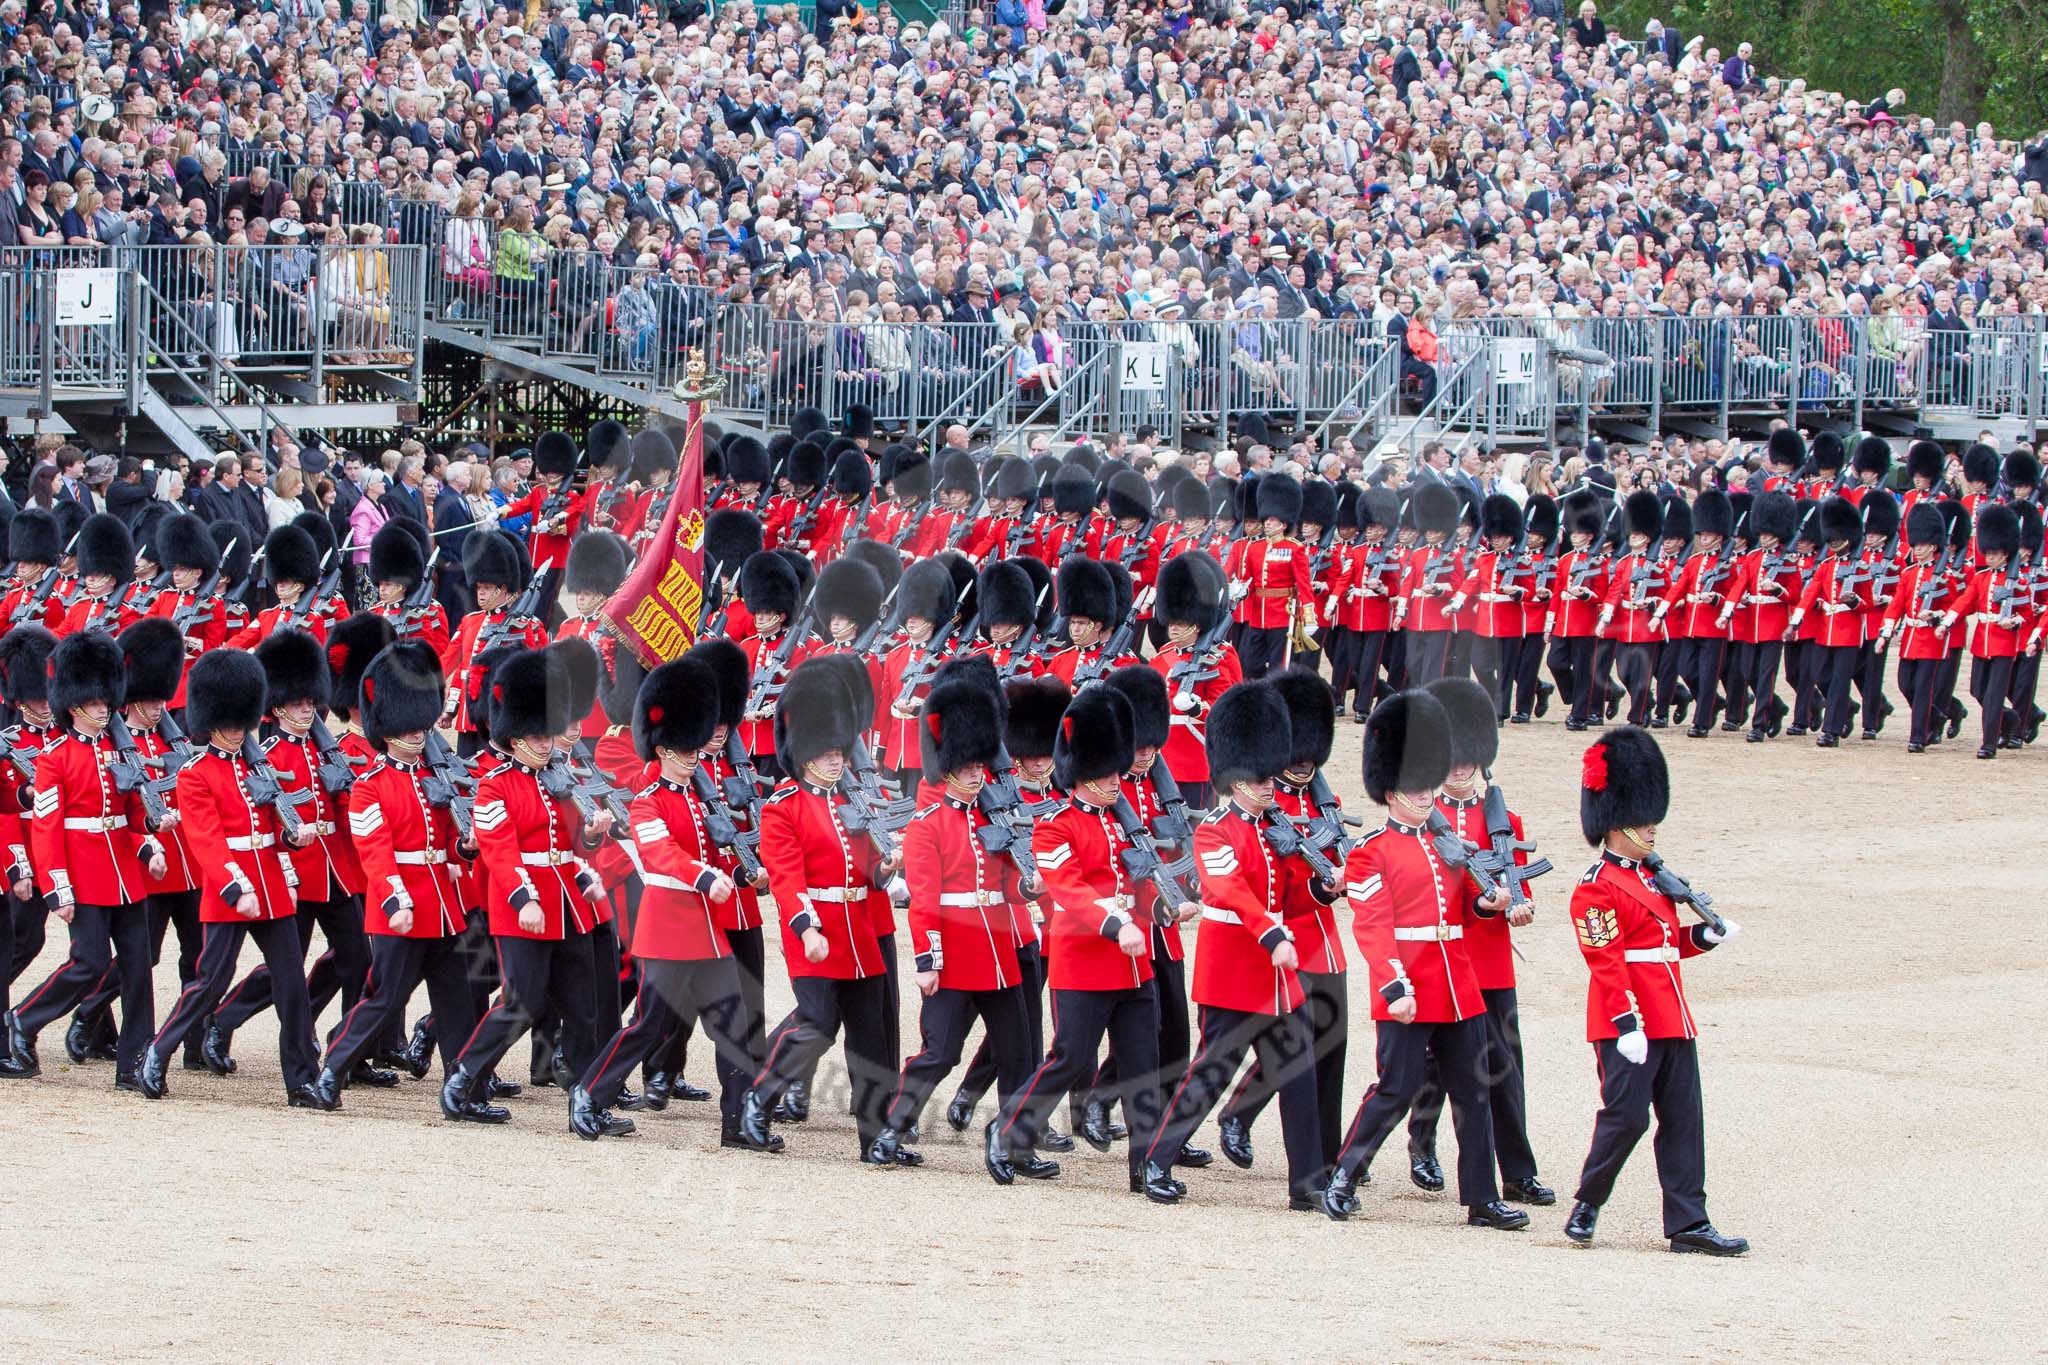 Trooping the Colour 2012: The March Past: No. 1 Guard (Escort to the Colour), 1st Battalion Coldstream Guards, marching along the western side of Horse Guards Parade for the second time, turning to the left again..
Horse Guards Parade, Westminster,
London SW1,

United Kingdom,
on 16 June 2012 at 11:44, image #478